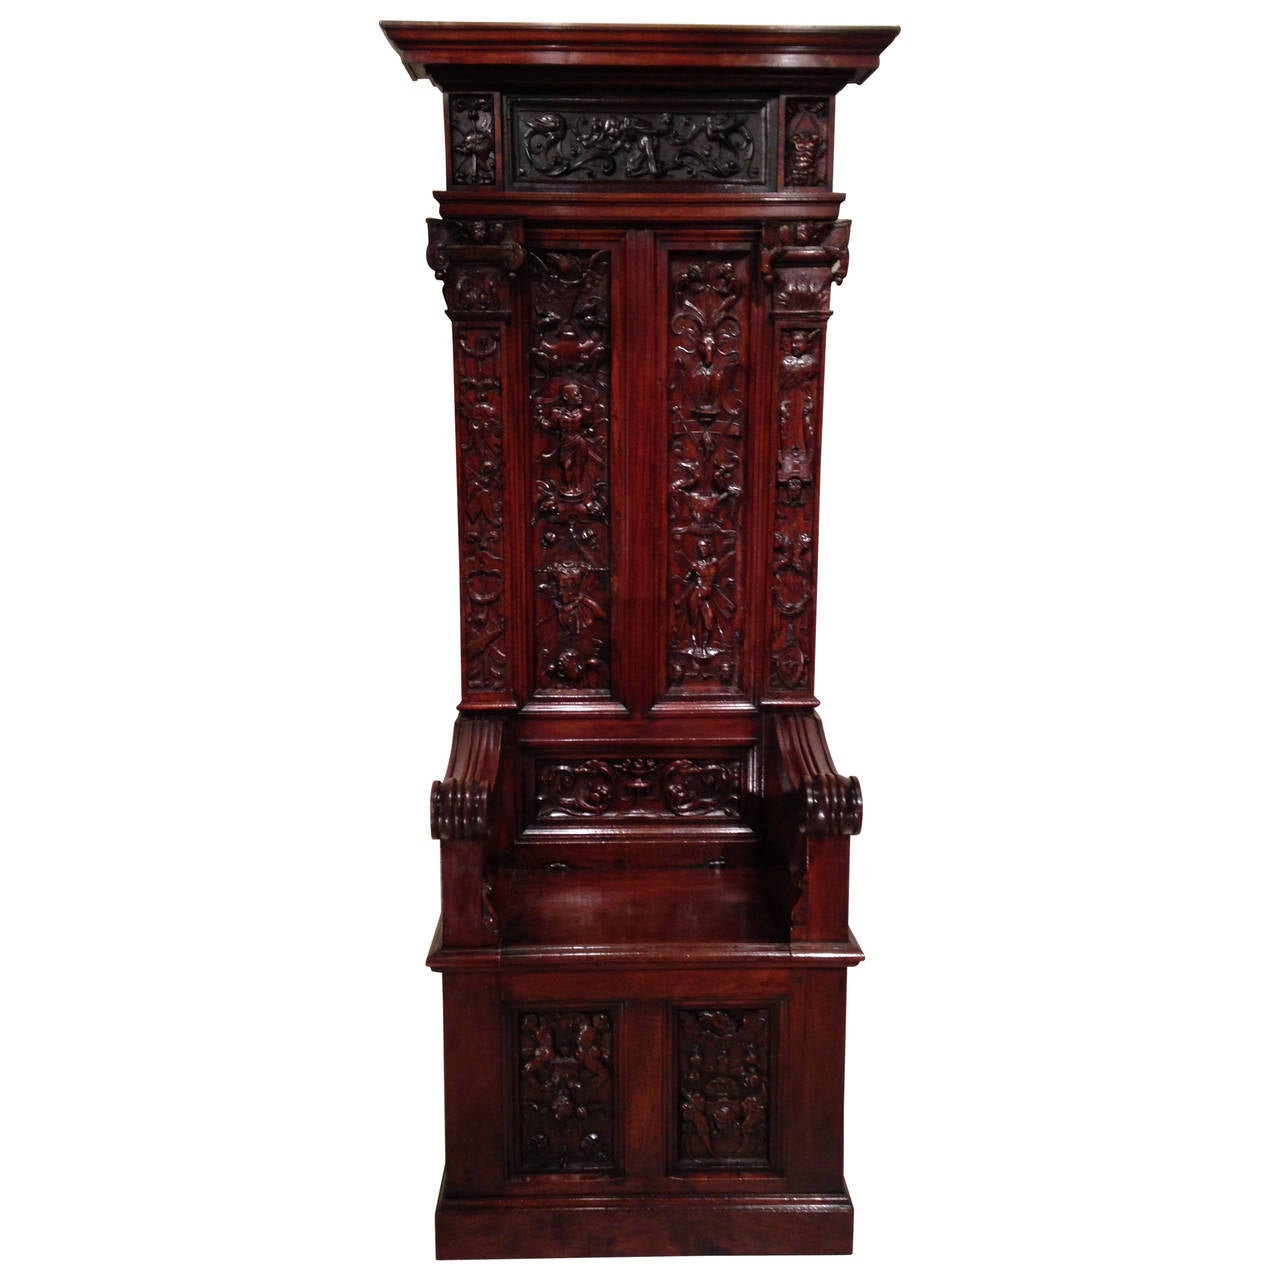 Exceptional French Renaissance Throne  François 1st Period  Circa 1520 For Sale